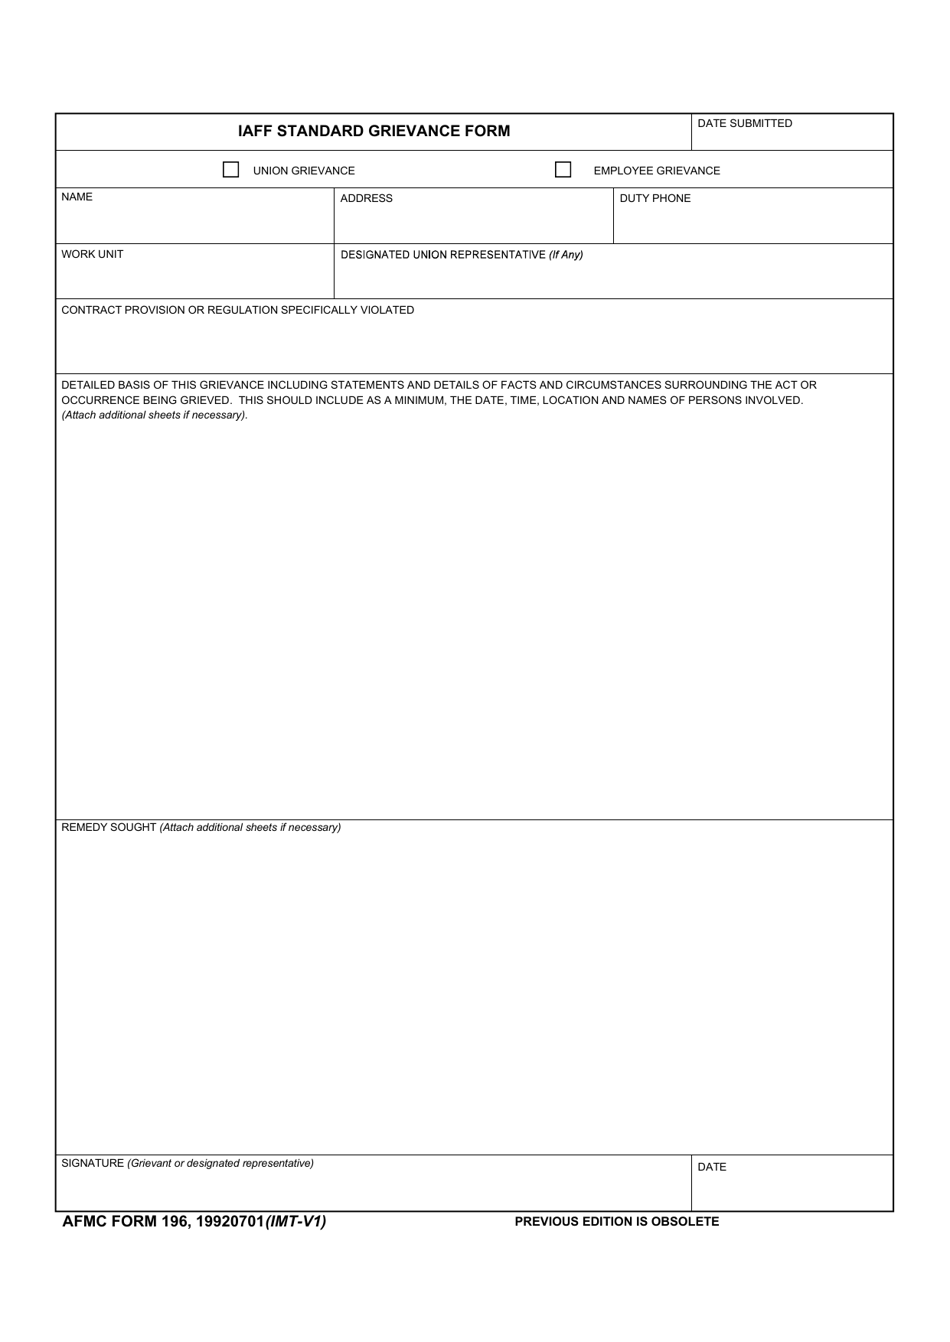 AFMC Form 196 Iaff Standard Grievance Form, Page 1